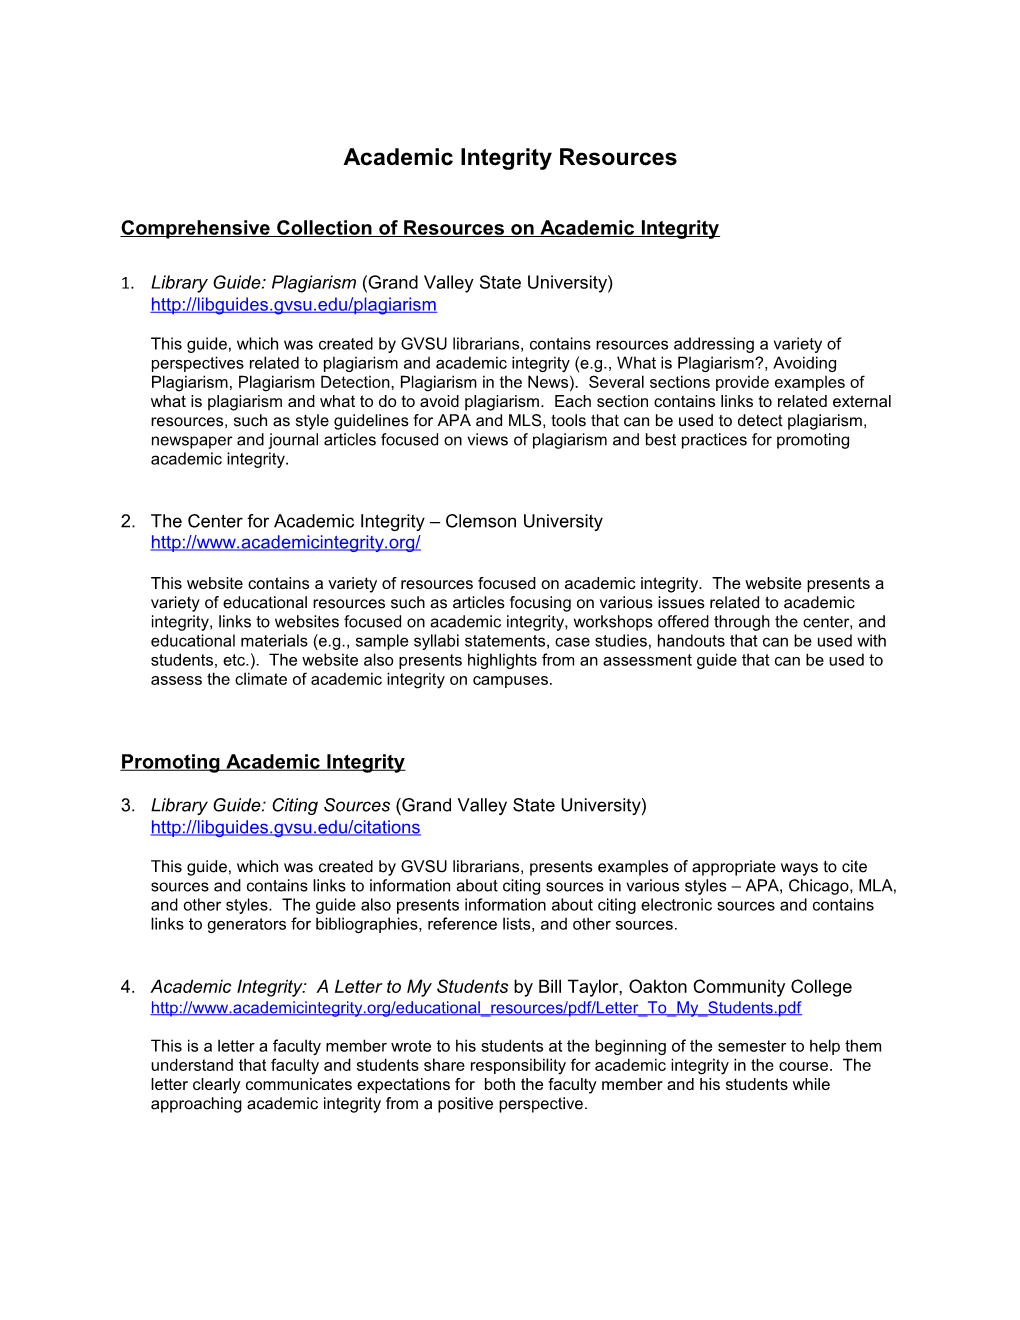 Comprehensive Collection of Resources on Academic Integrity